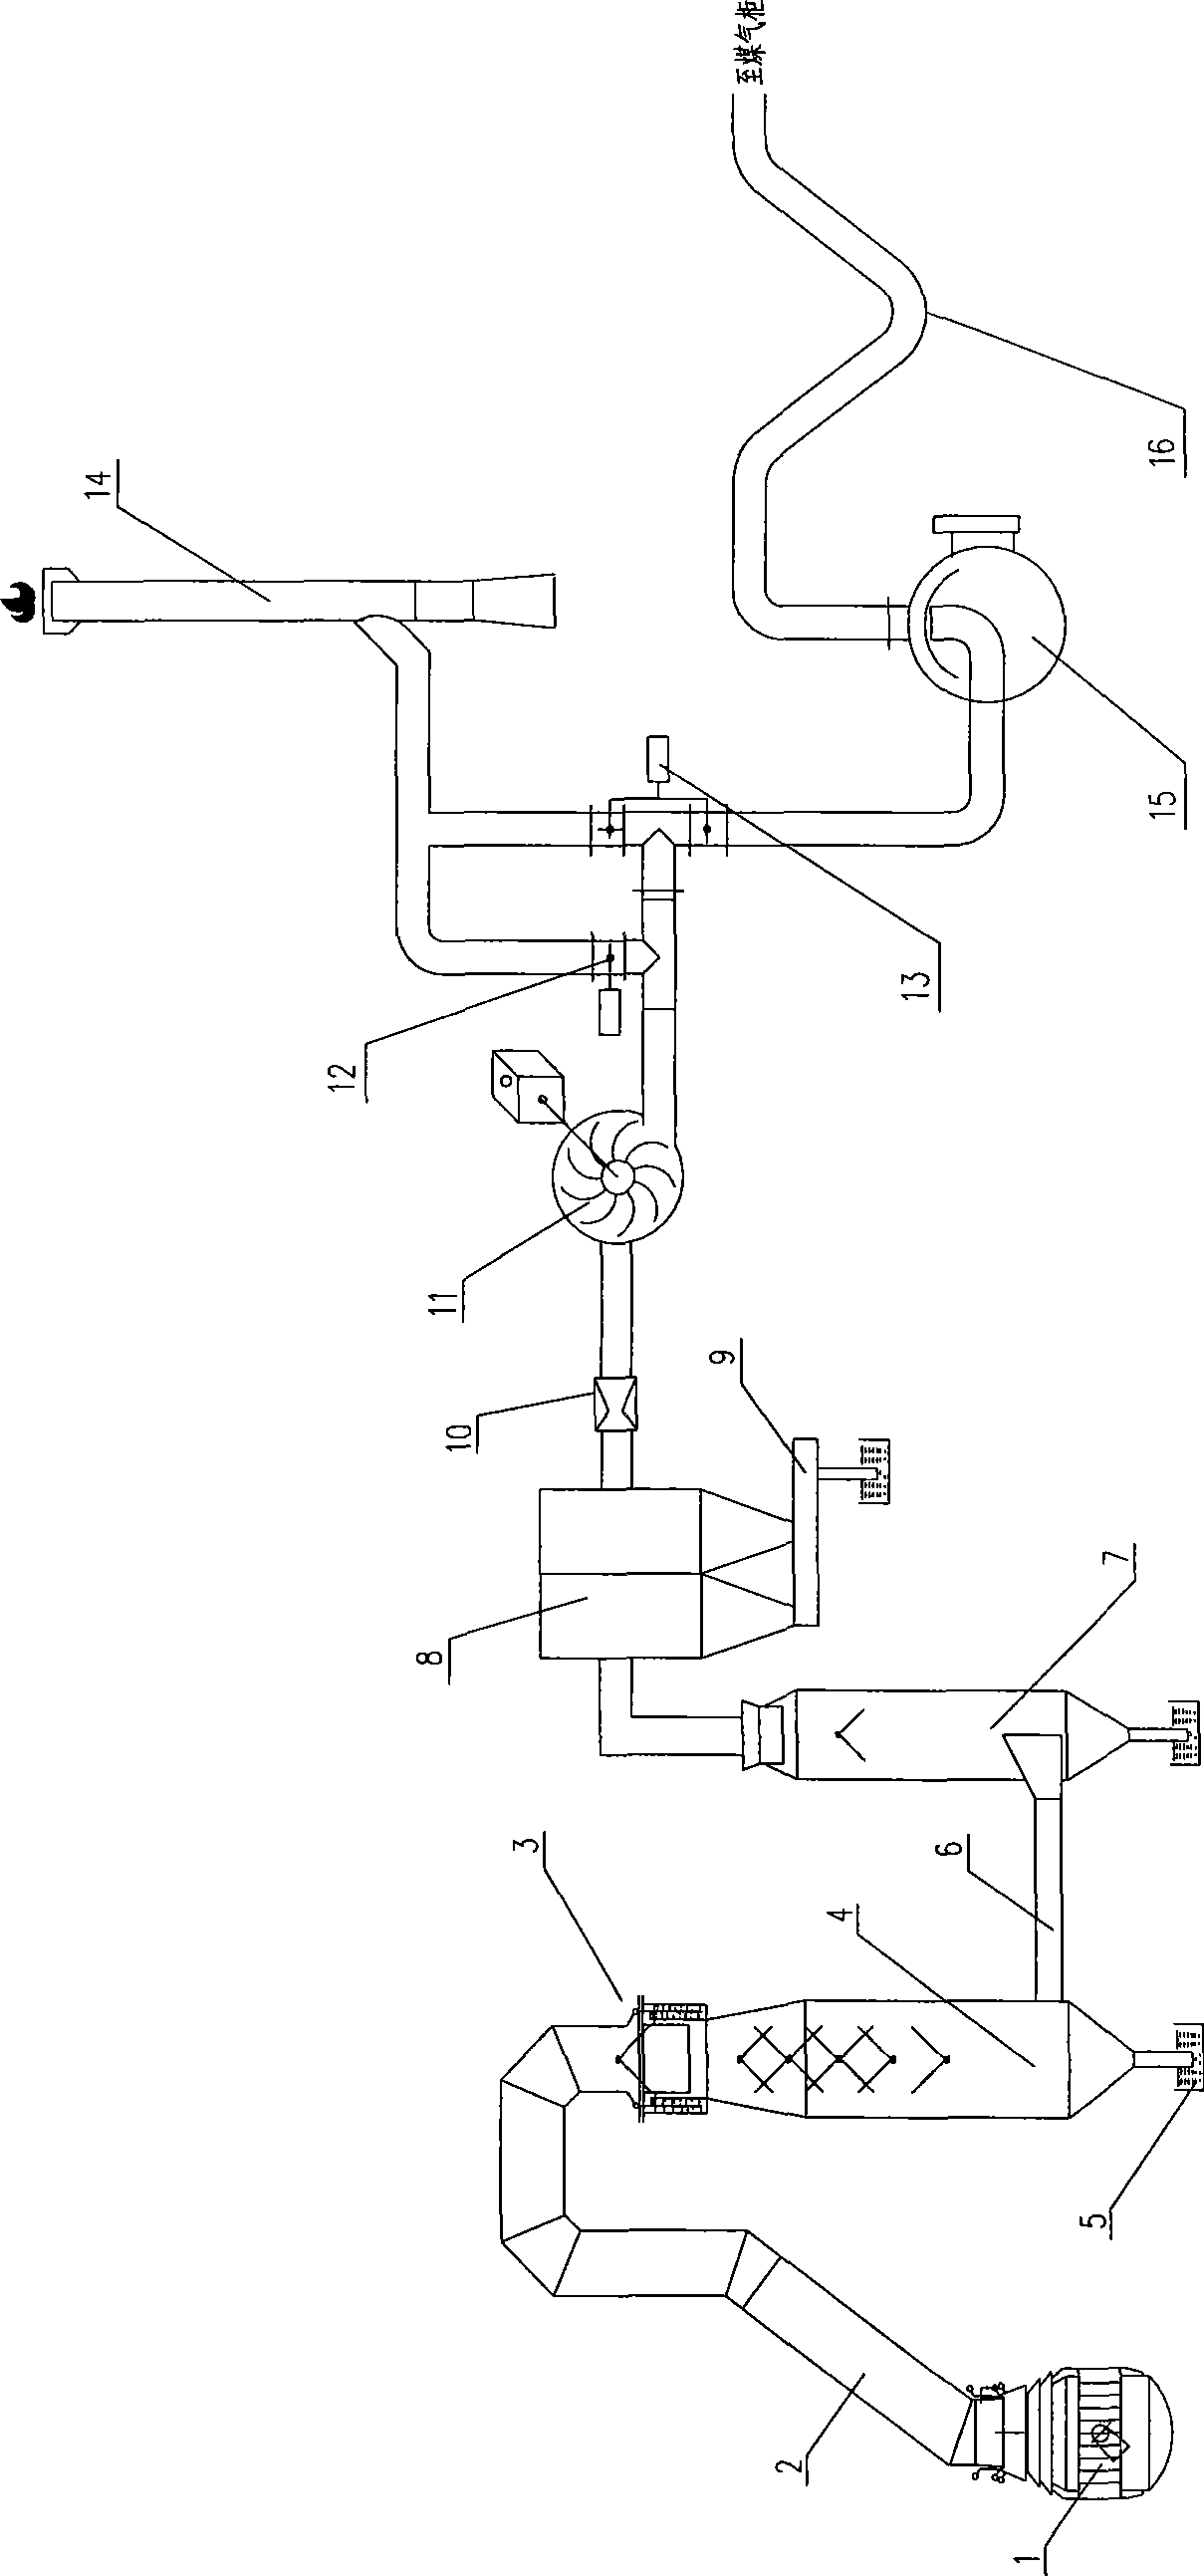 Converter gas purification and recovery process and system